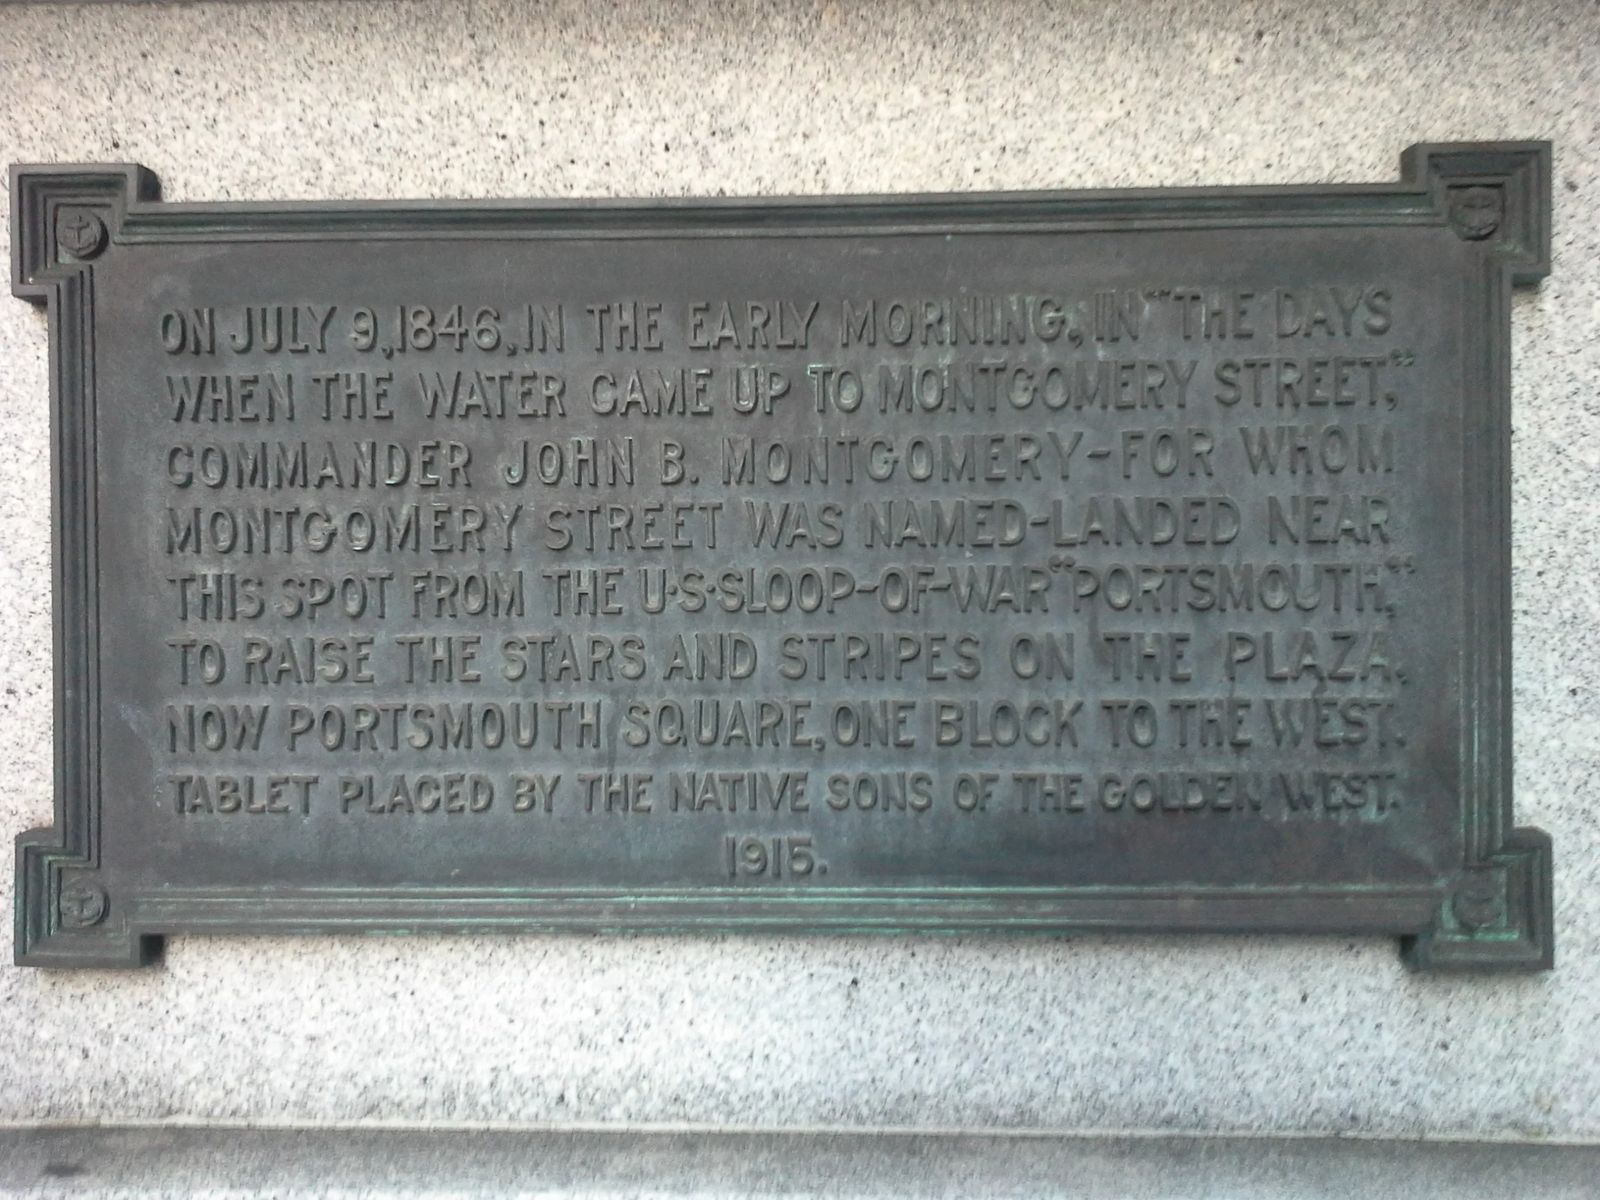 Photo of a plaque that marks the original shoreline location in San Francisco, California, where Captain John B. Montgomery of the US sloop-of-war "Portsmouth," came ashore to plant the U.S. flag. July 9, 1846.